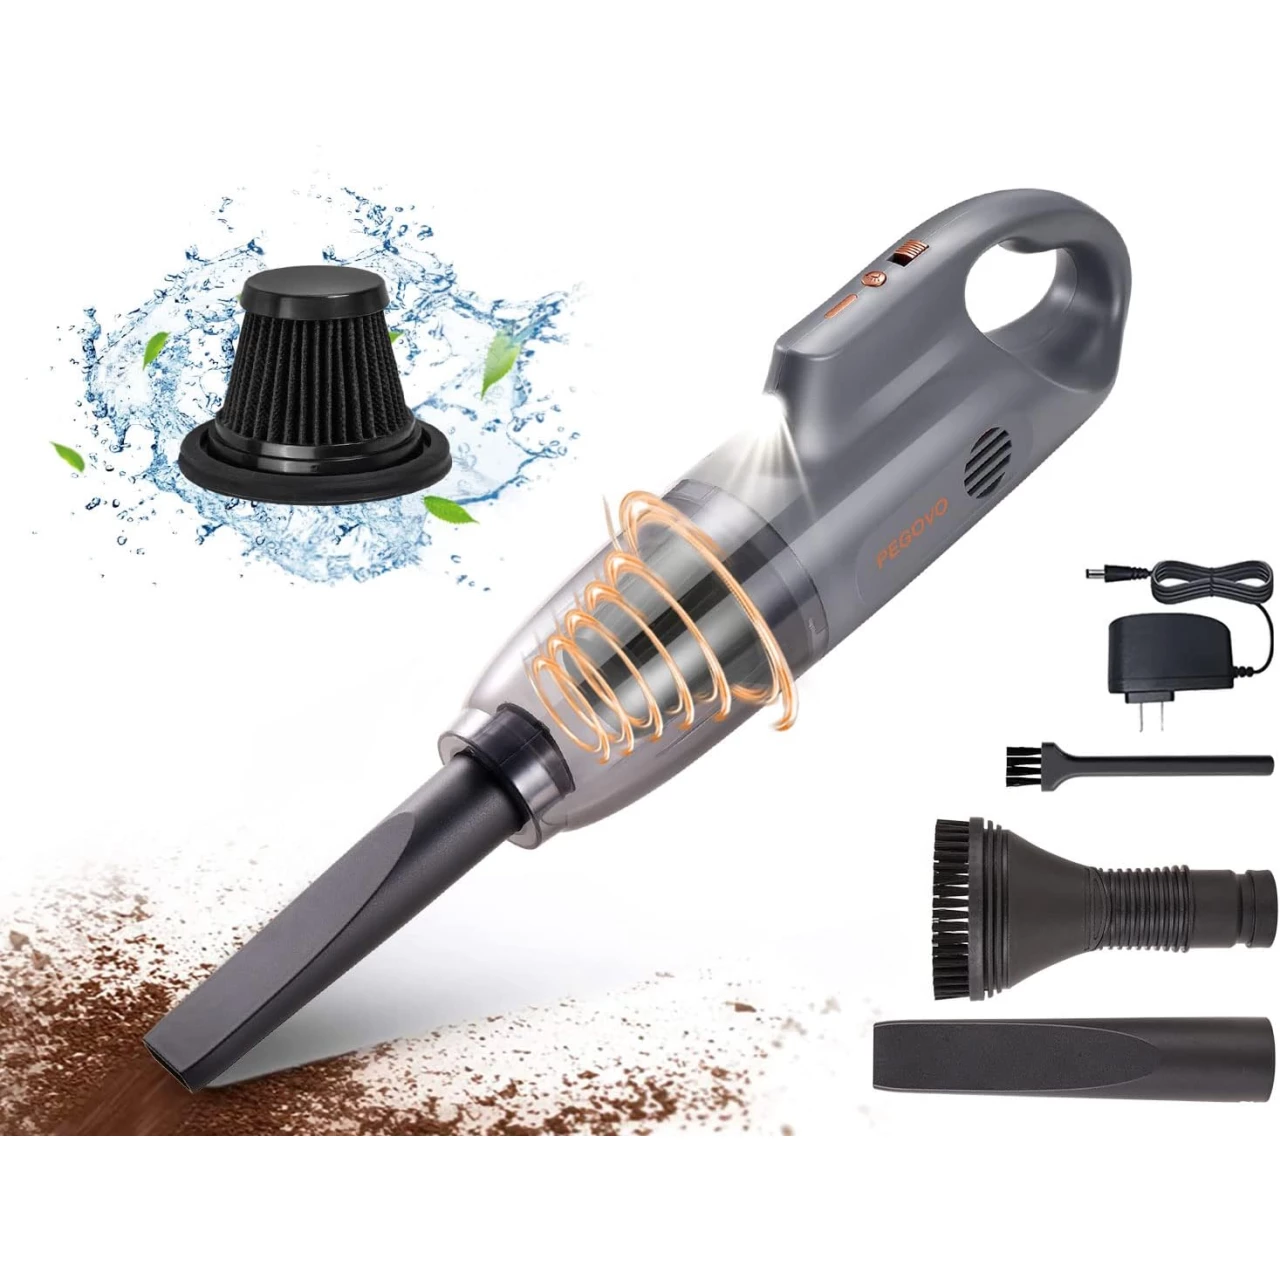 Hand Held Vacuuming Cordless Rechargeable-10K PA Strong Suction Car Vacuum Cordless Rechargeable, Handheld Vacuum Cordless Cleaner, Hand Vacuum with Large Dirt Bowl, Washable Filter &amp; Cleaning Brush